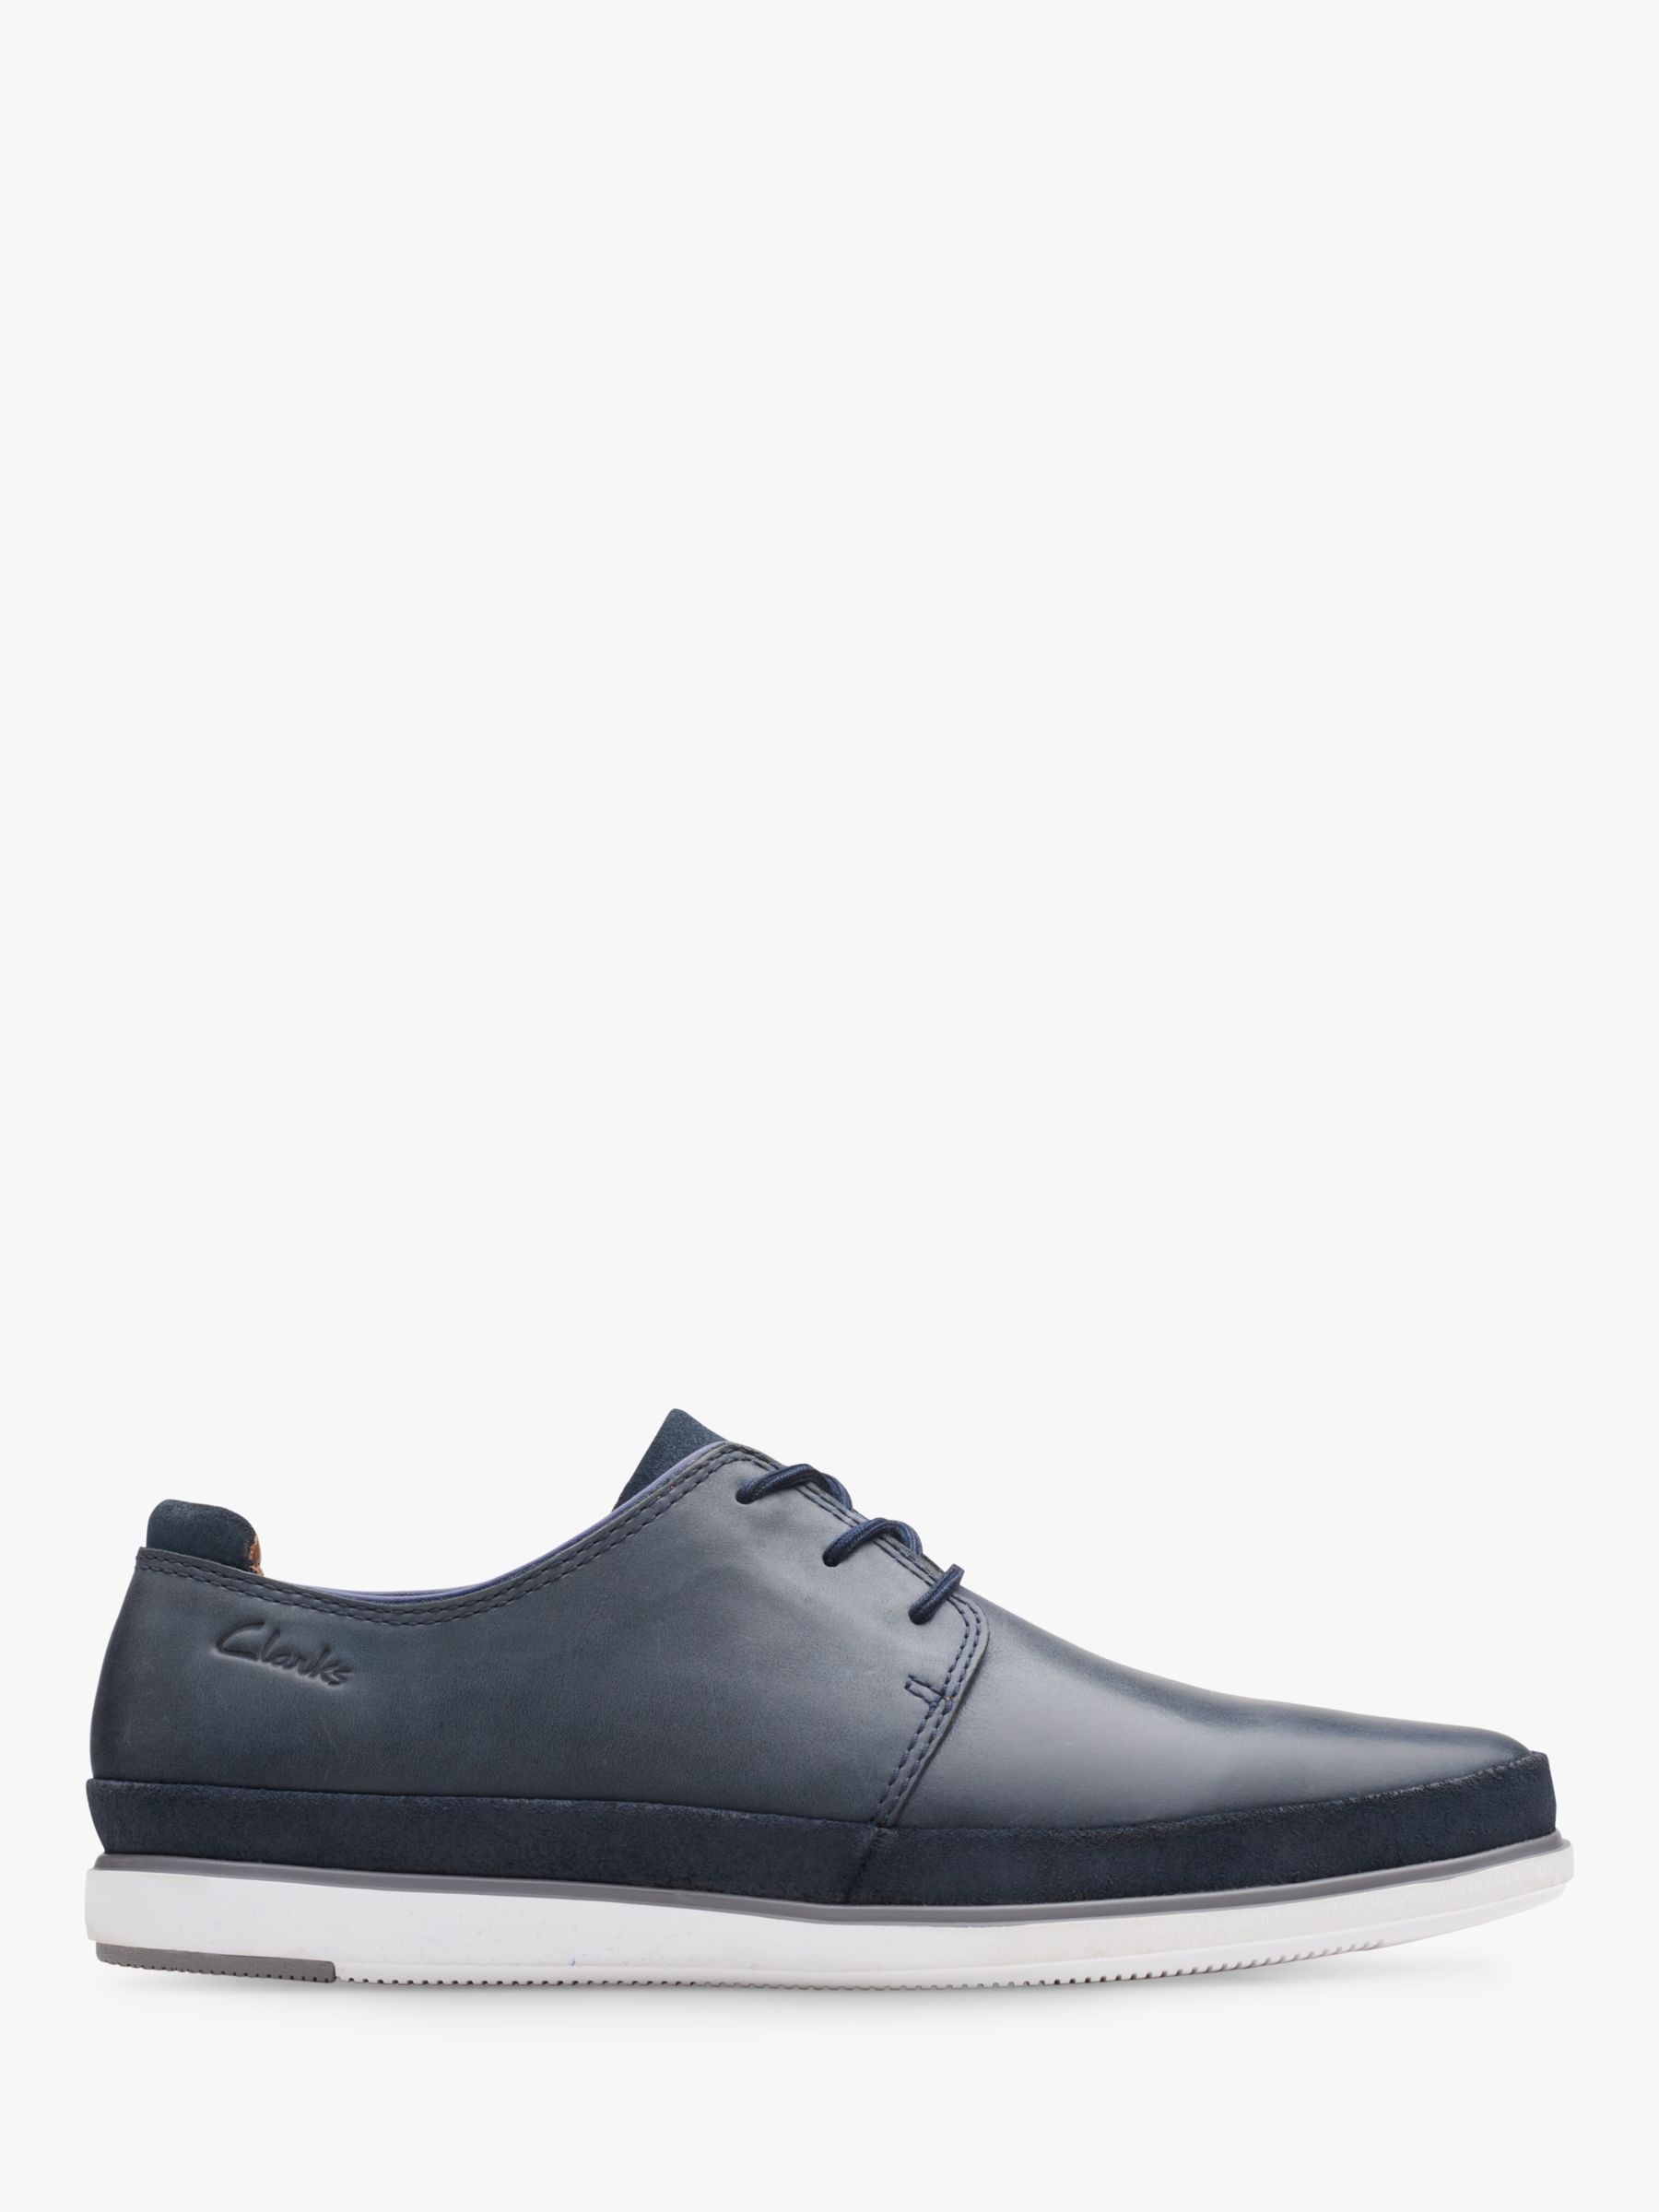 Clarks Bratton Lace Up Casual Leather Shoes, Navy at John Lewis & Partners